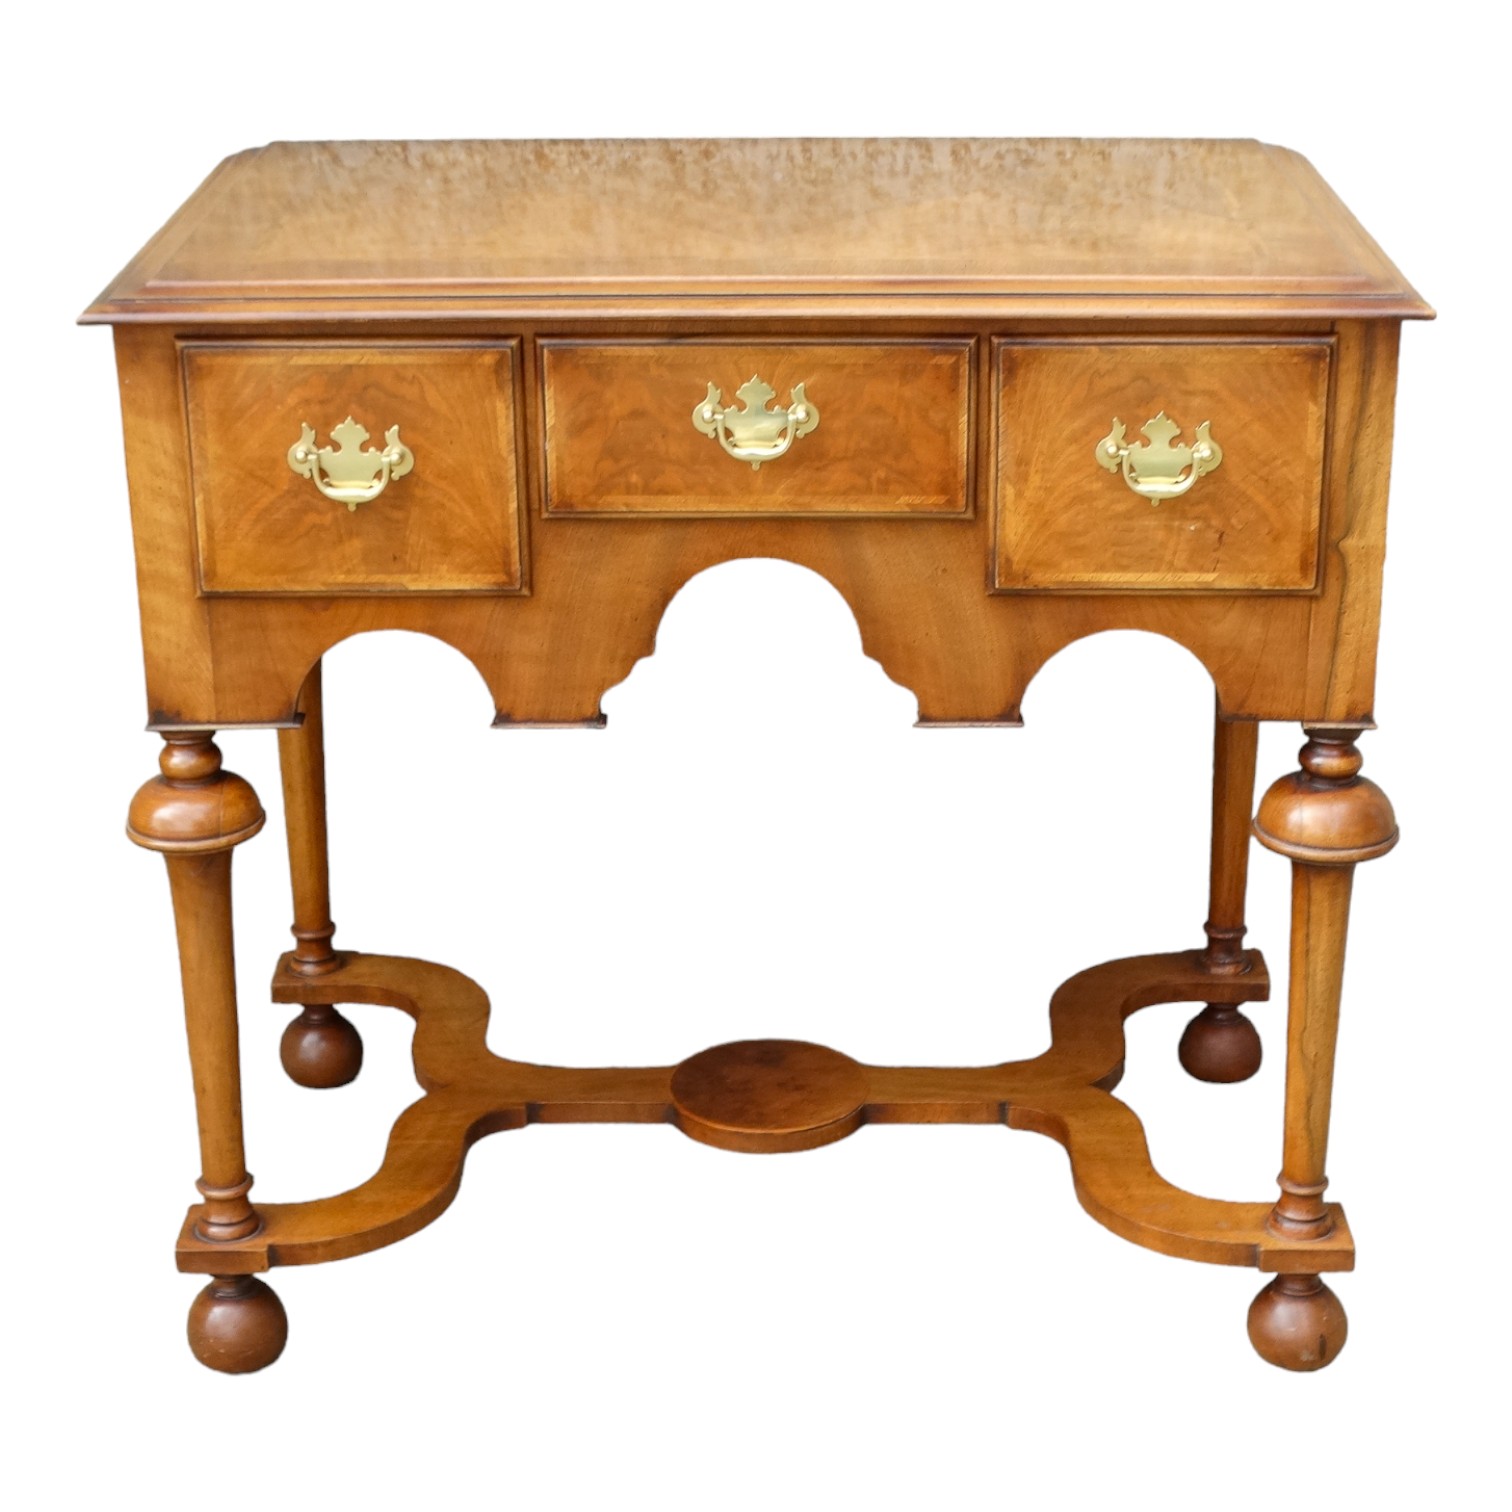 A walnut William and Mary style lowboy - the rectangular moulded top with cross banding above an